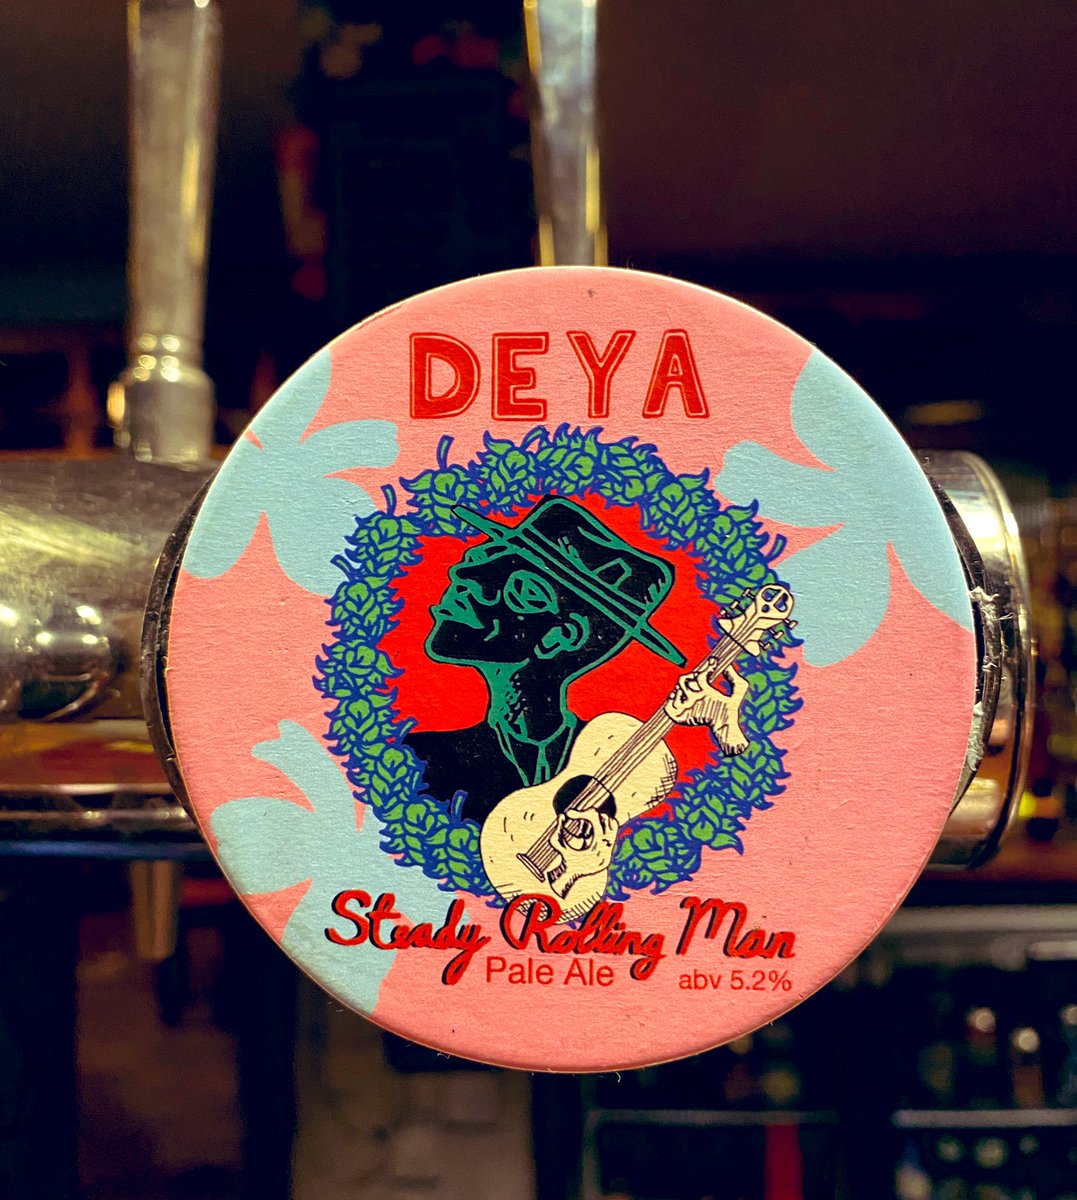 The last thing I did last night before I left the pub was to make sure this was on and ready for your Friday night! 

Aren’t I good to you?! 

@deyabrewery ‘Steady rolling man’ - absolute classic pale ale on now 

It’s one we all love? X

#craftbeer #steadyrollingman #beer #deya